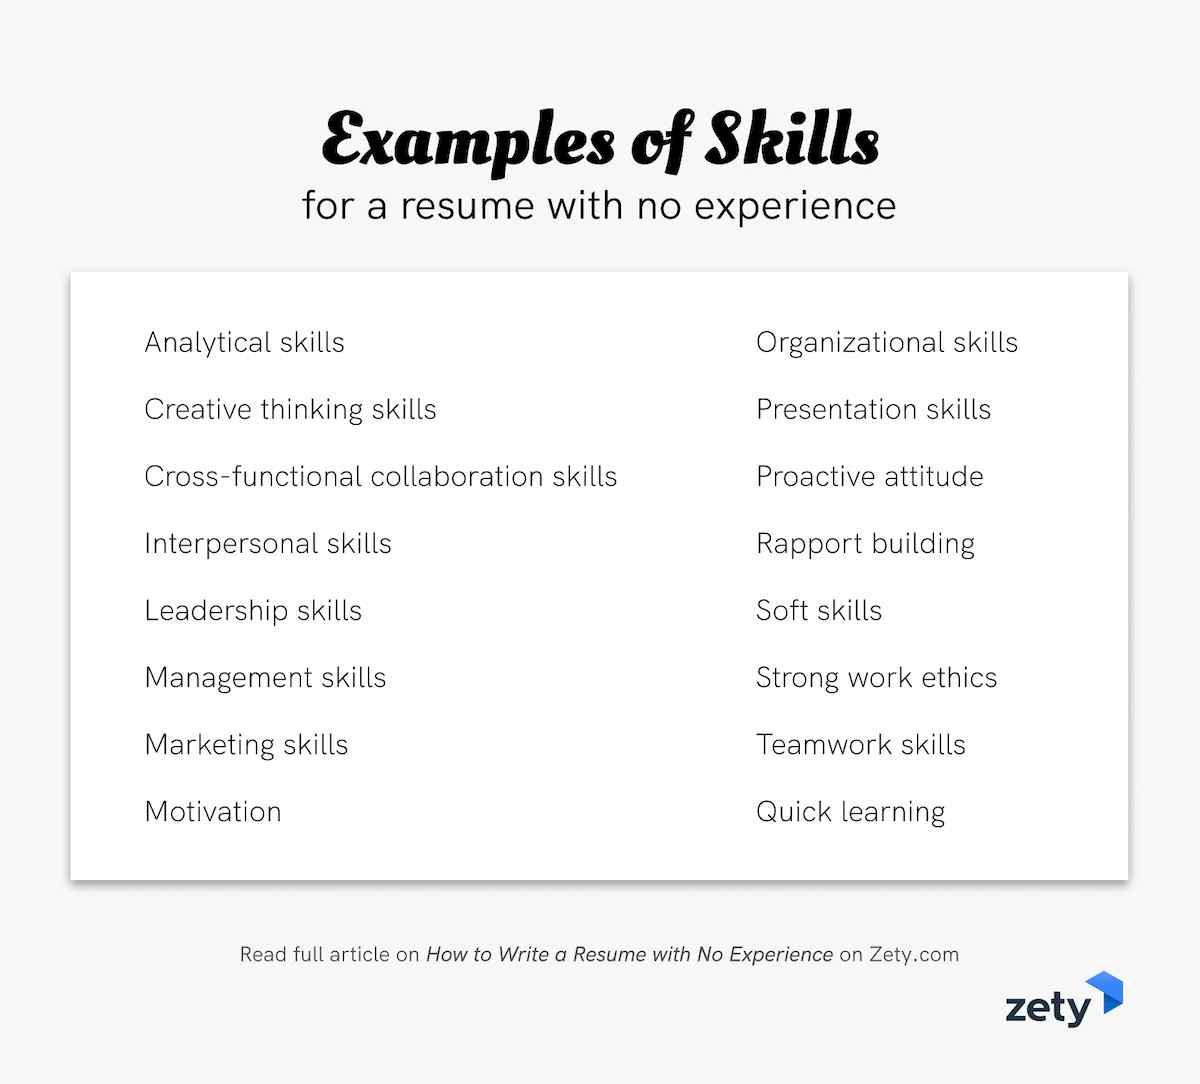 Resume Samples Highlight Skills Not Experience or School How to Make A Resume with No Experience: First Job Examples